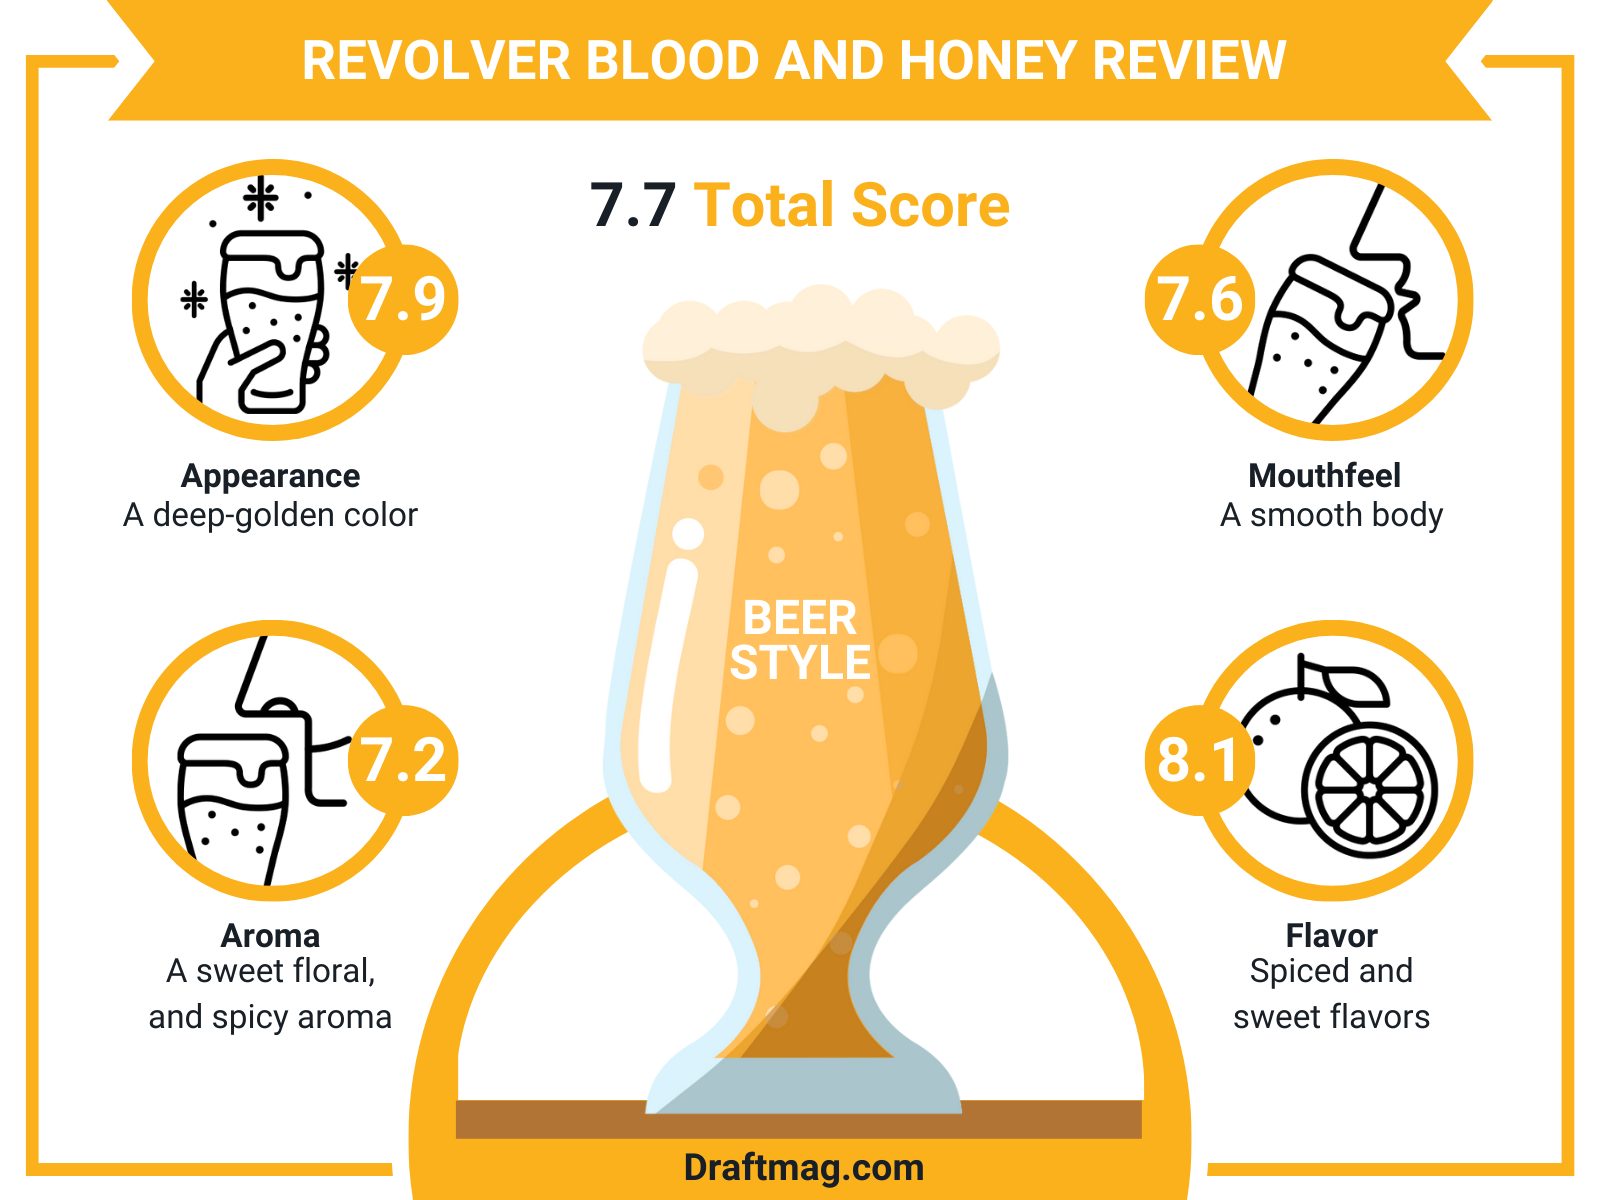 Revolver Blood Review Infographic